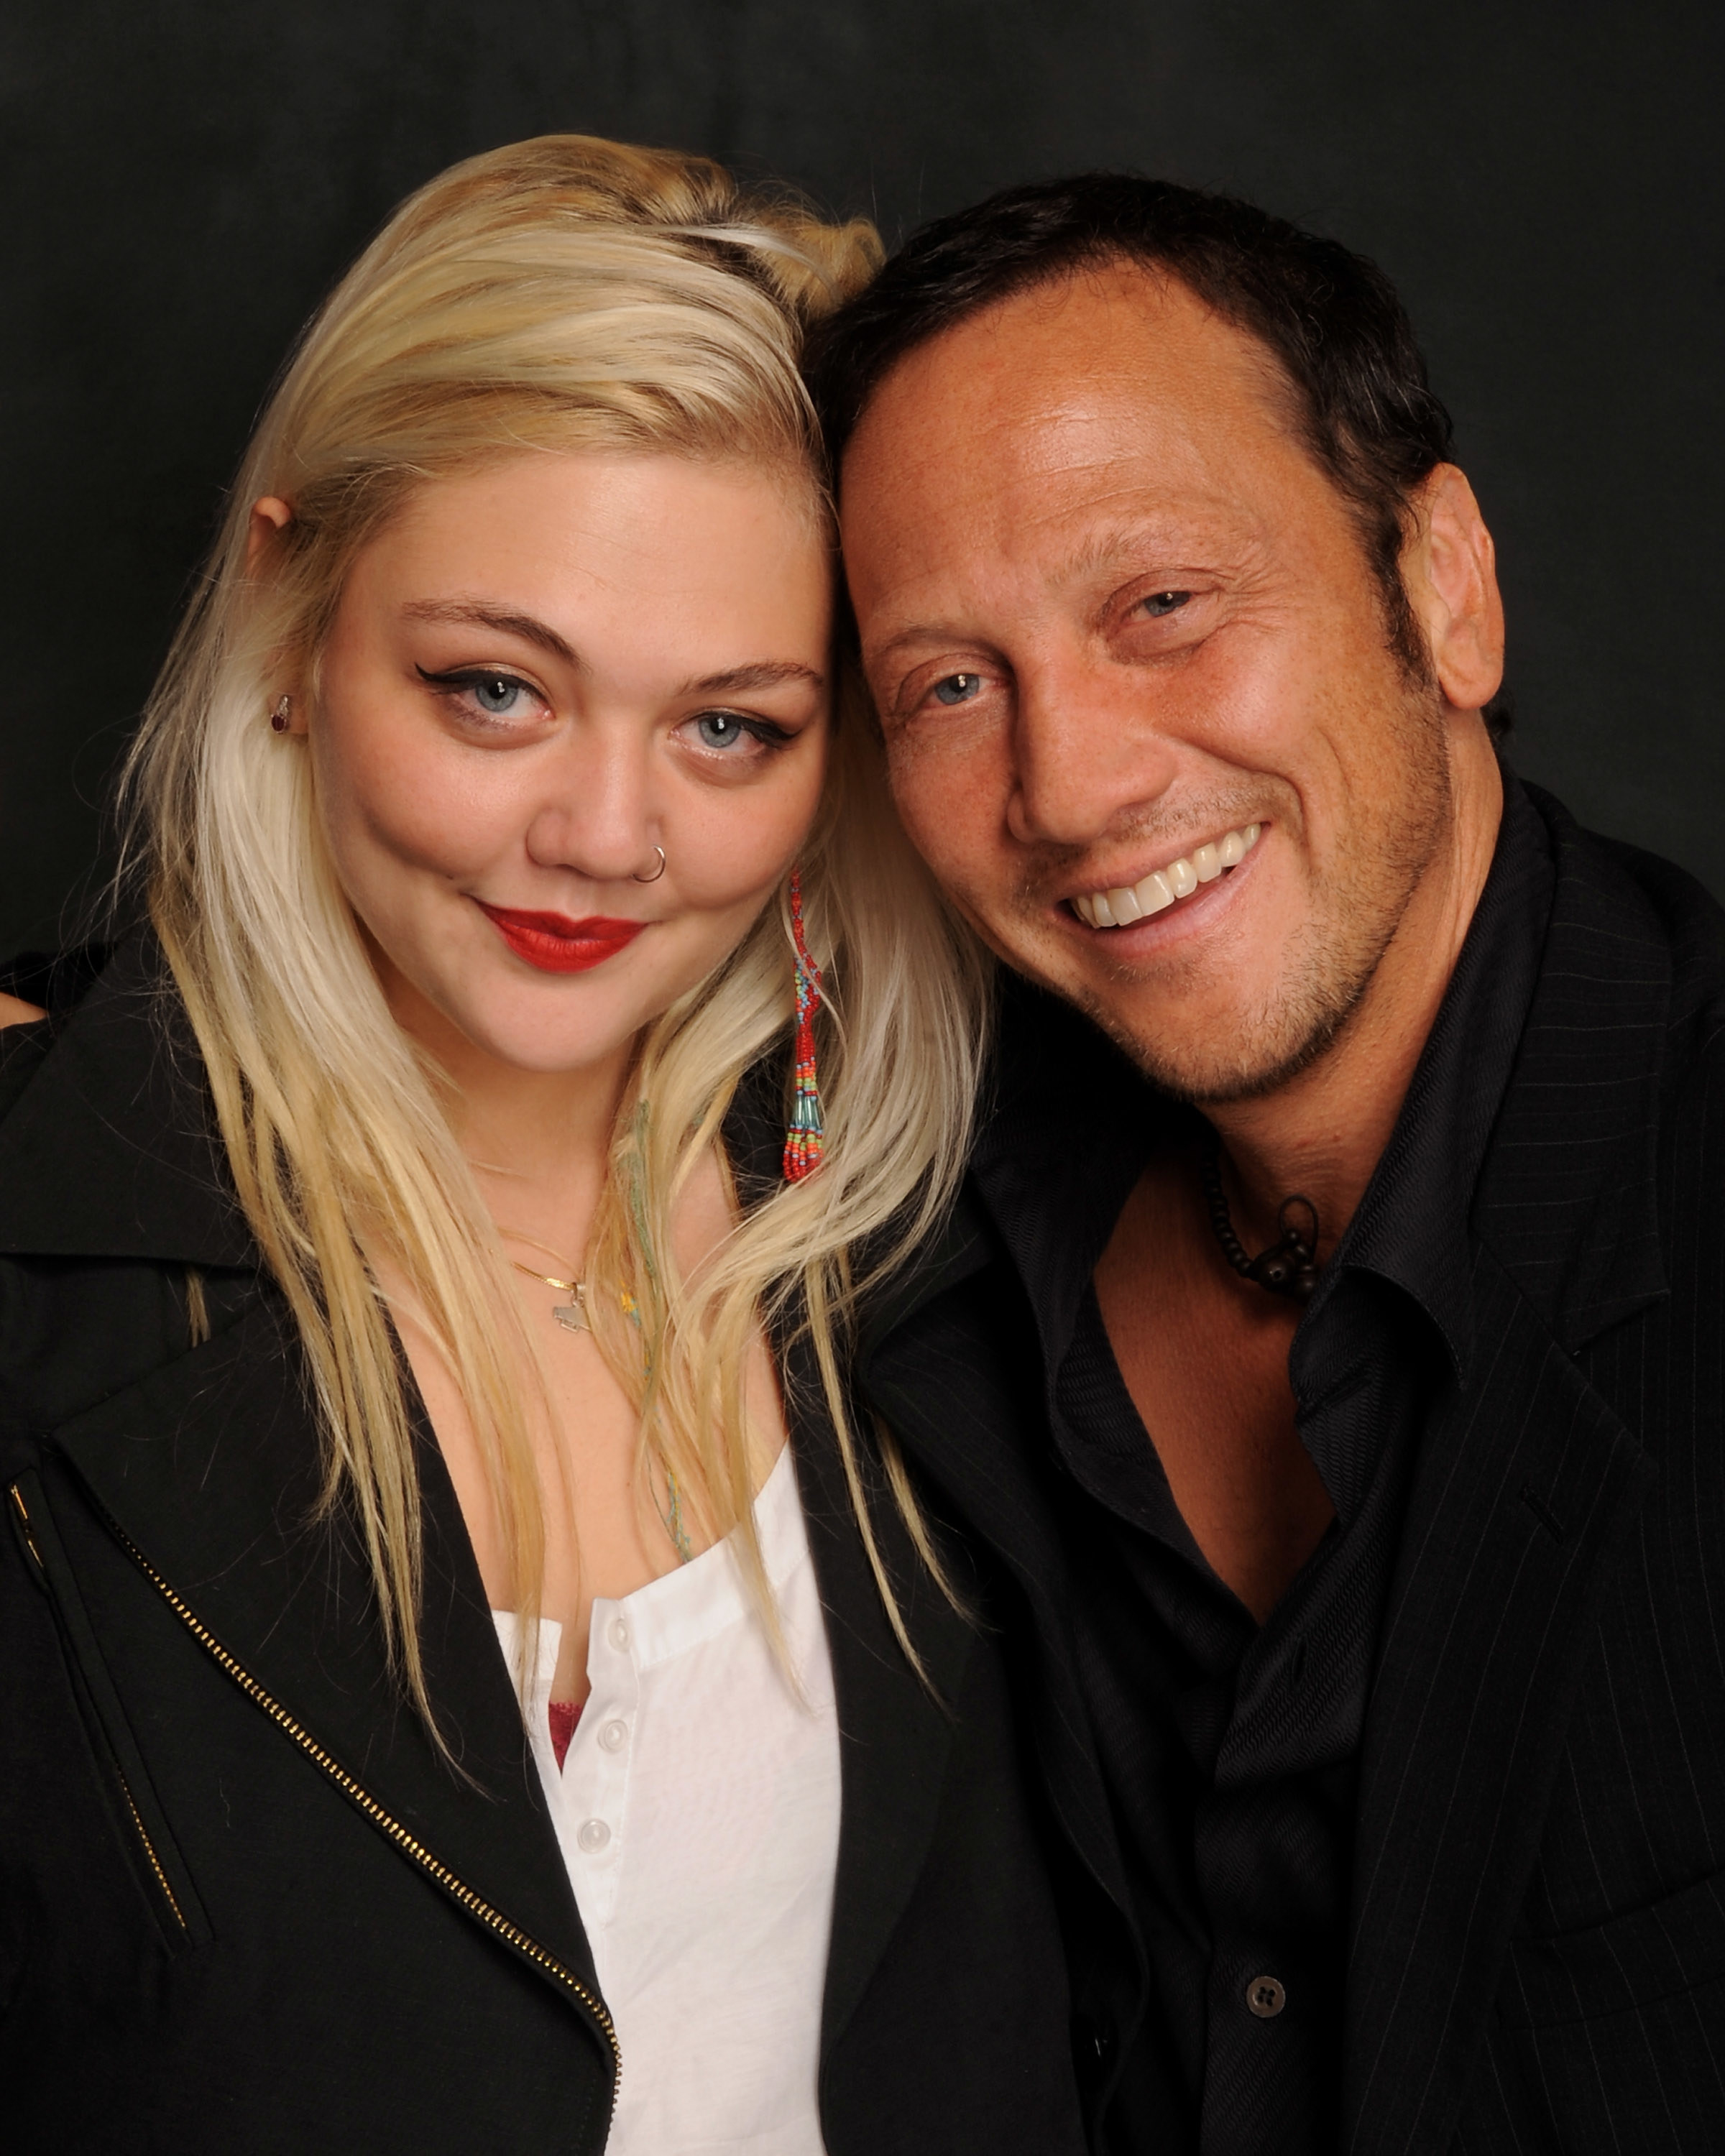 Elle King and Rob Schneider pose at the Ice House Comedy Club in October 2009